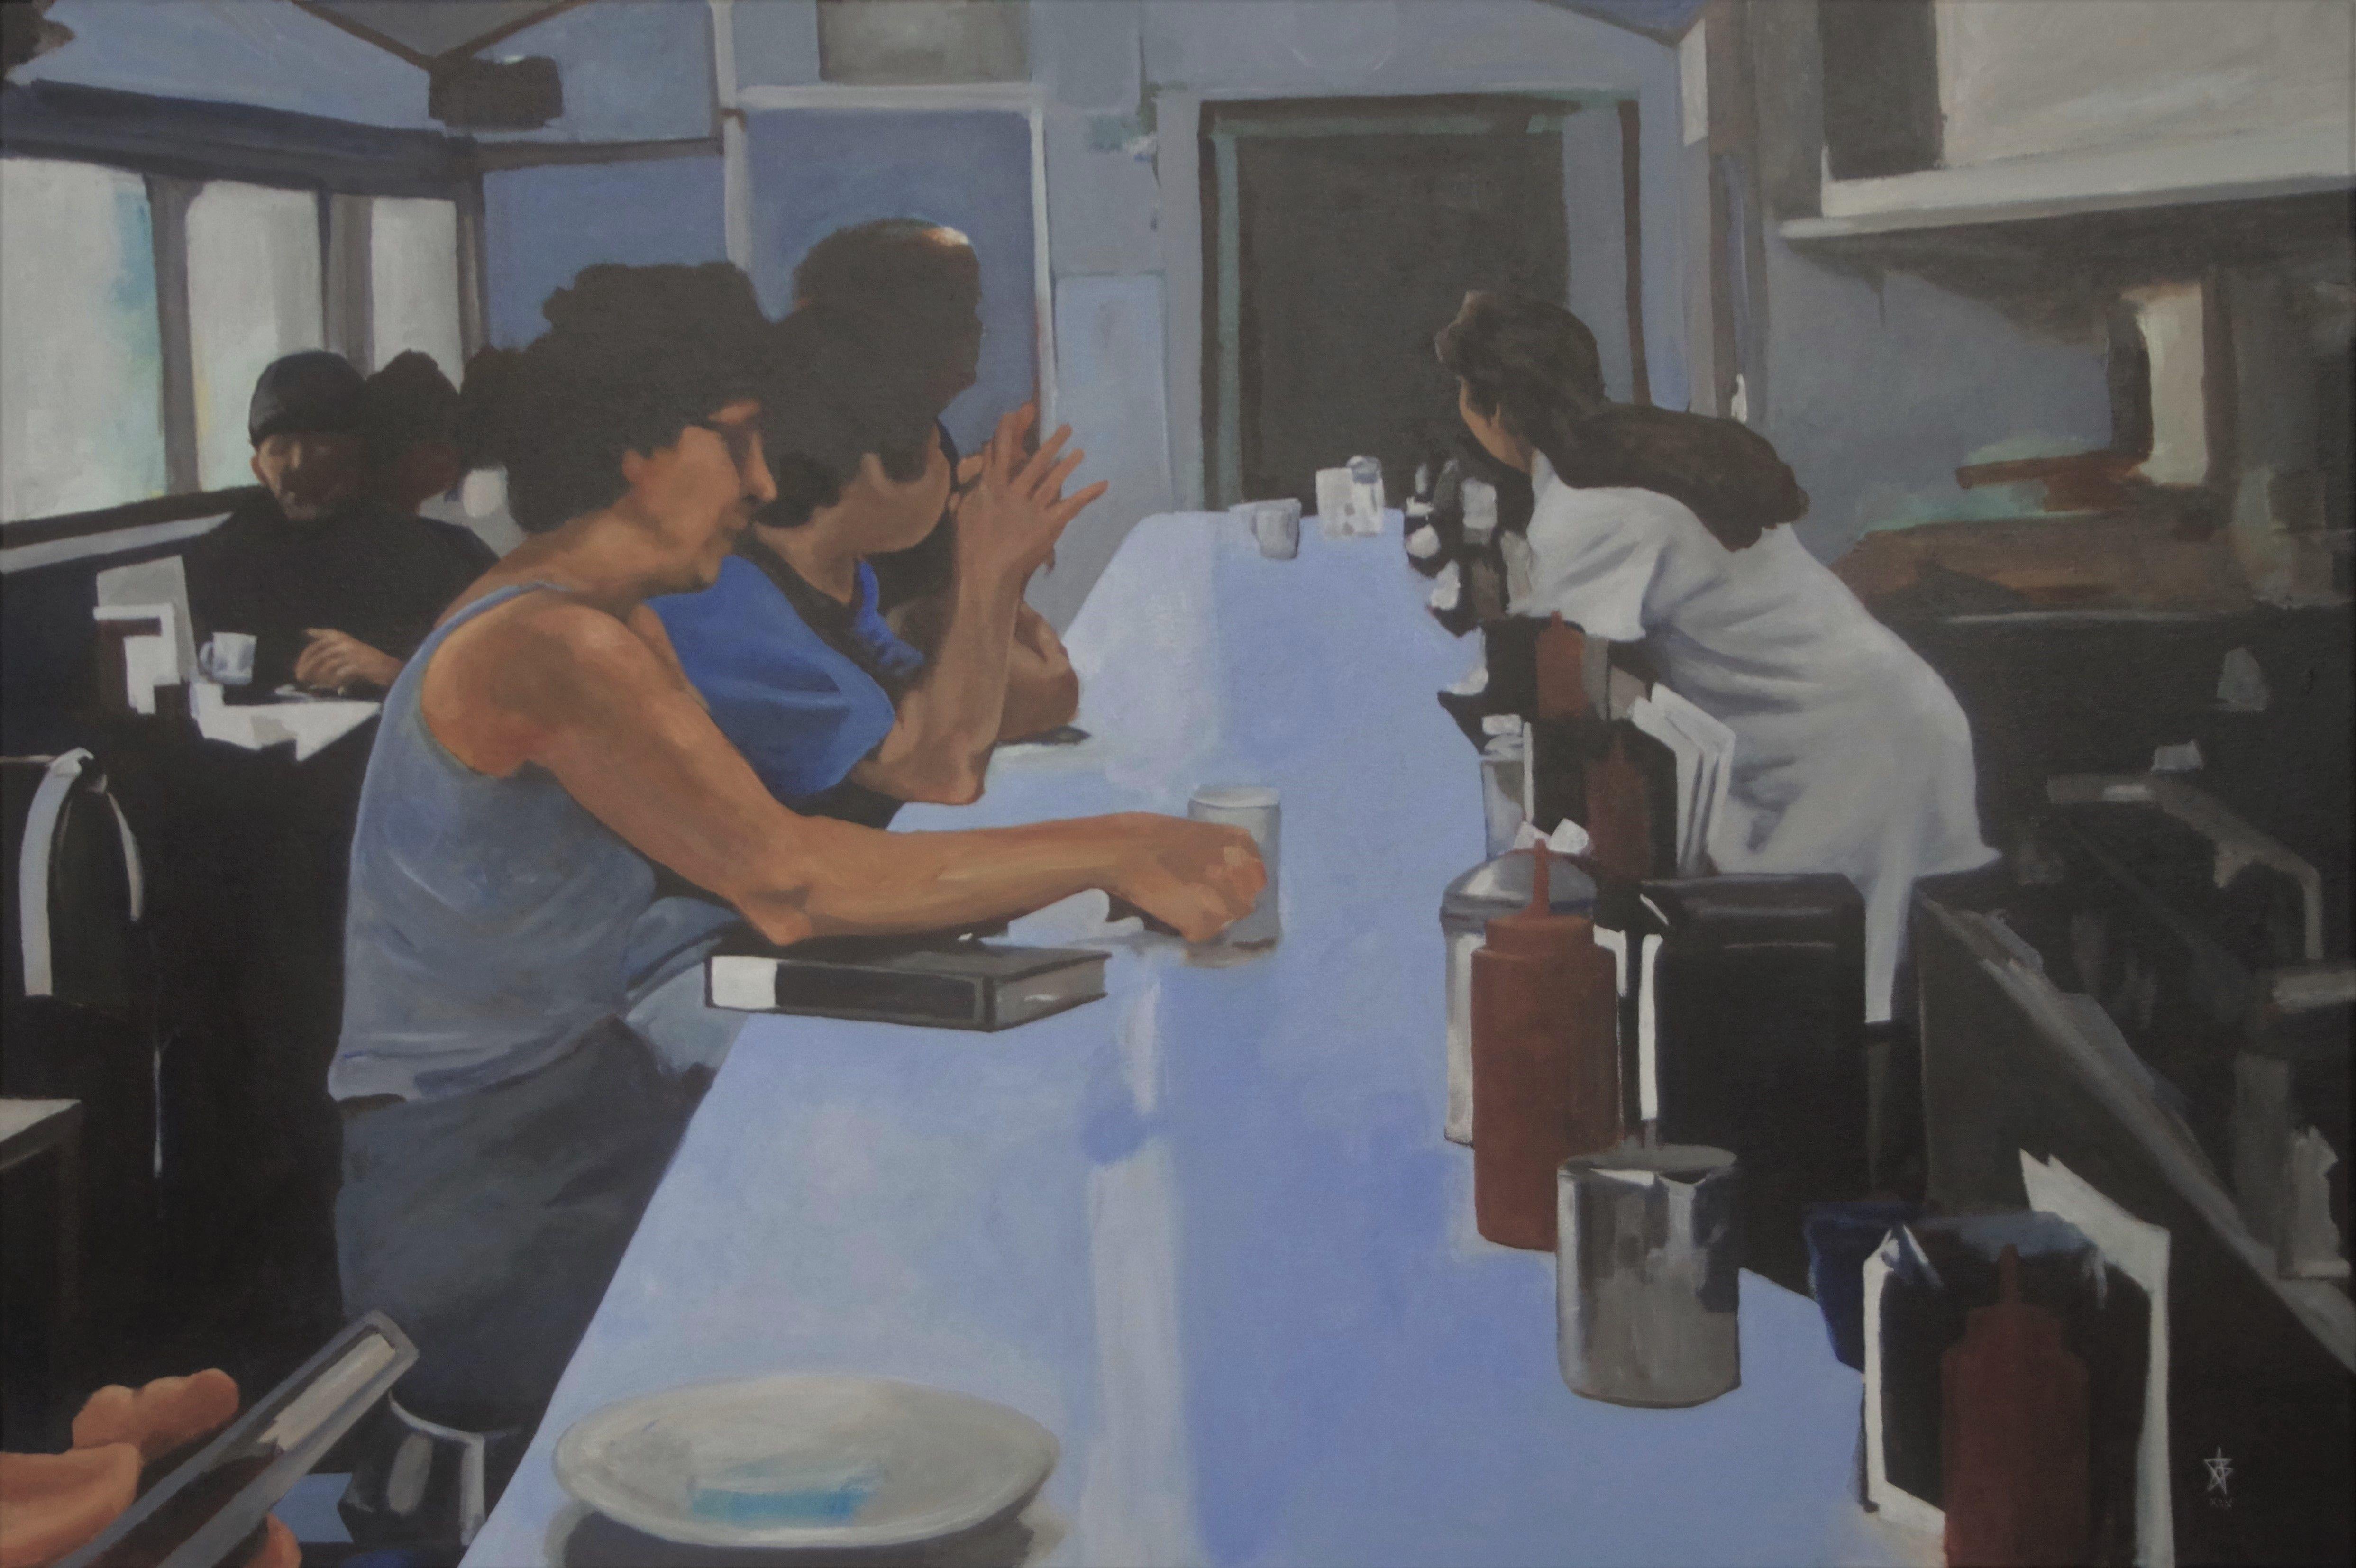 Set inside a classic diner, a scene of people communing around food. I always loved diners for their democracy and their patterns. Oil and some acrylic on cotton canvas stretched over a pine frame with unpainted sides. Can be hung as is or framed by